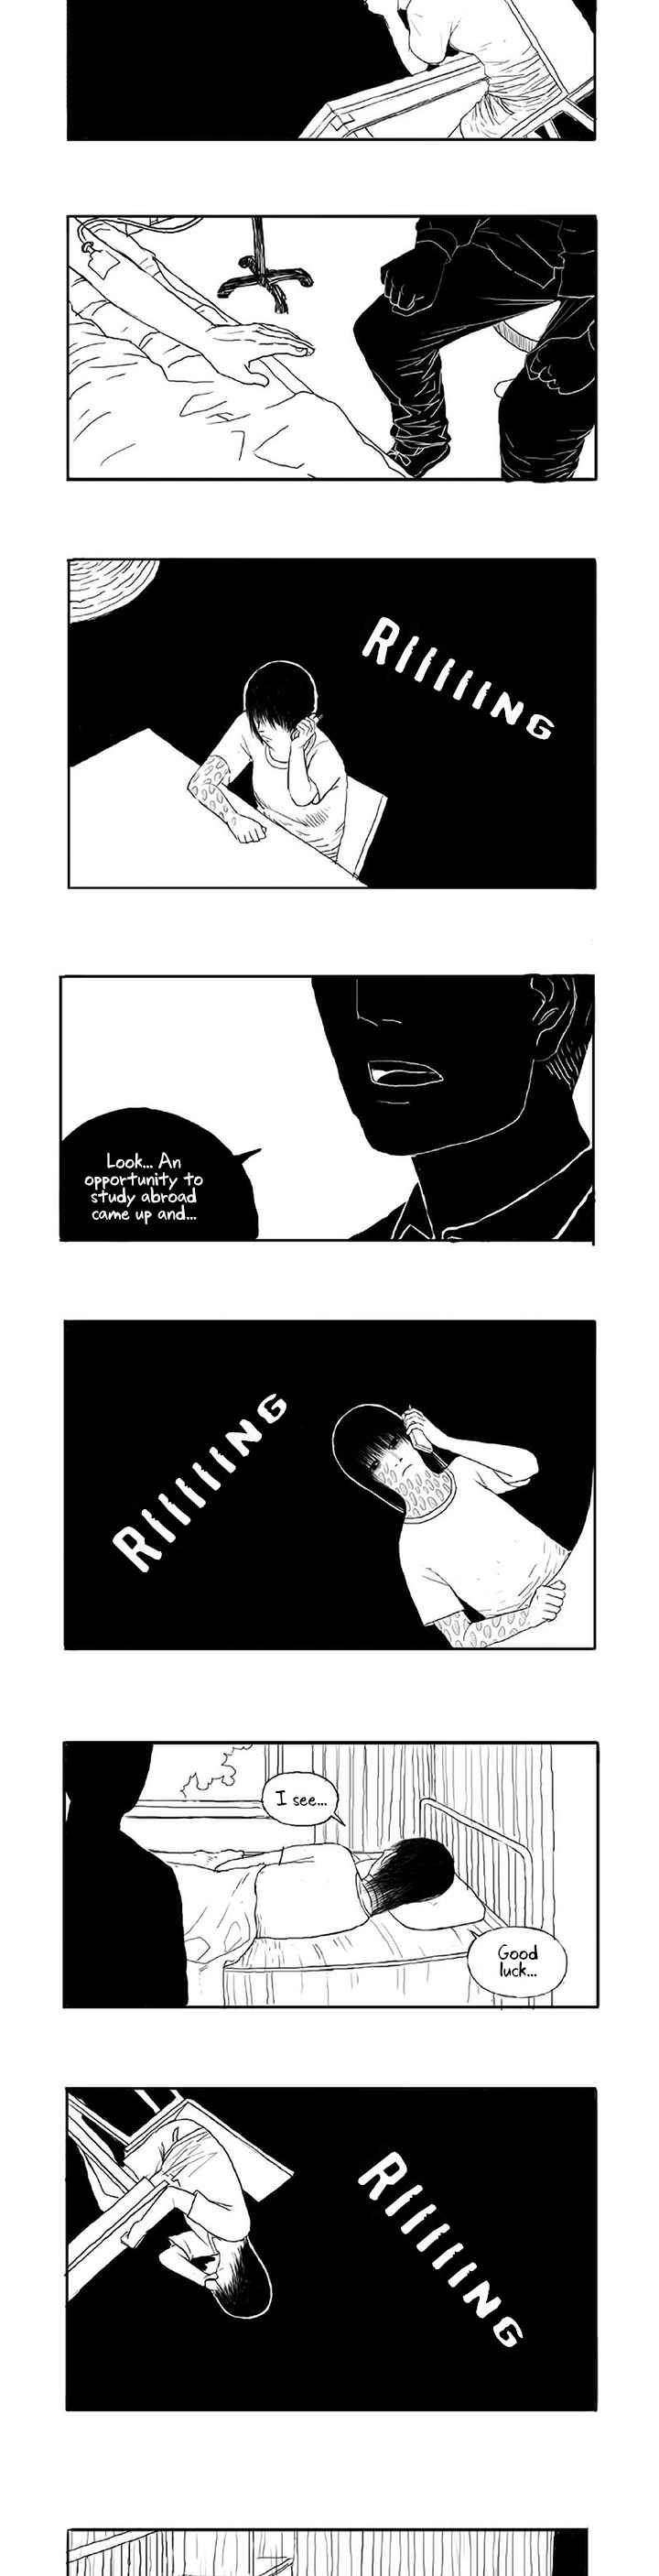 I Have Something to Tell You Vol. 1 Ch. 3 Expectation